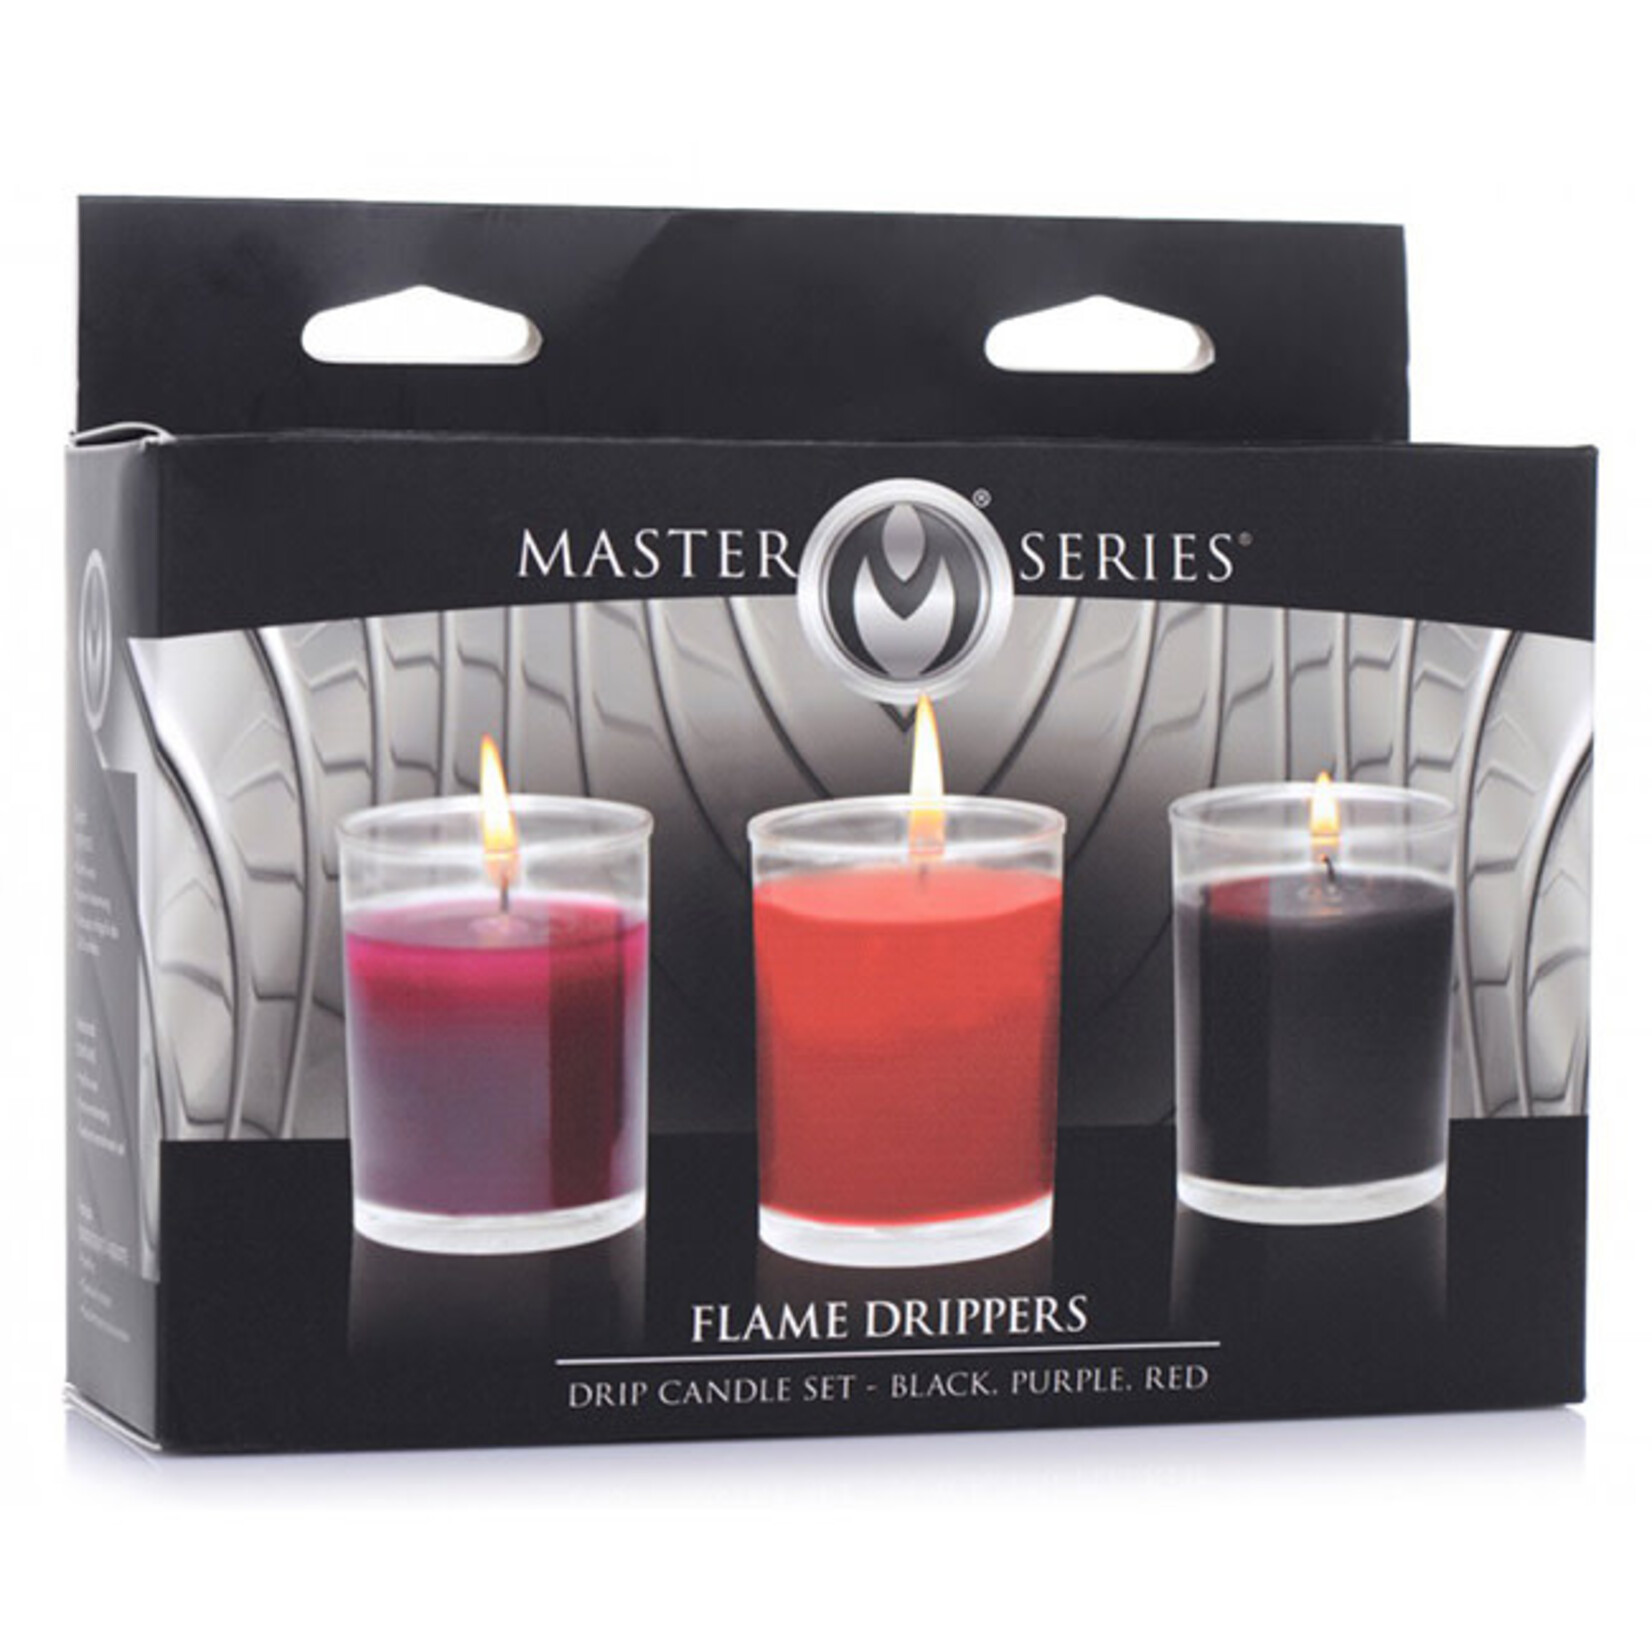 Master Series Master Series Flame Drippers - Drip Candle Set